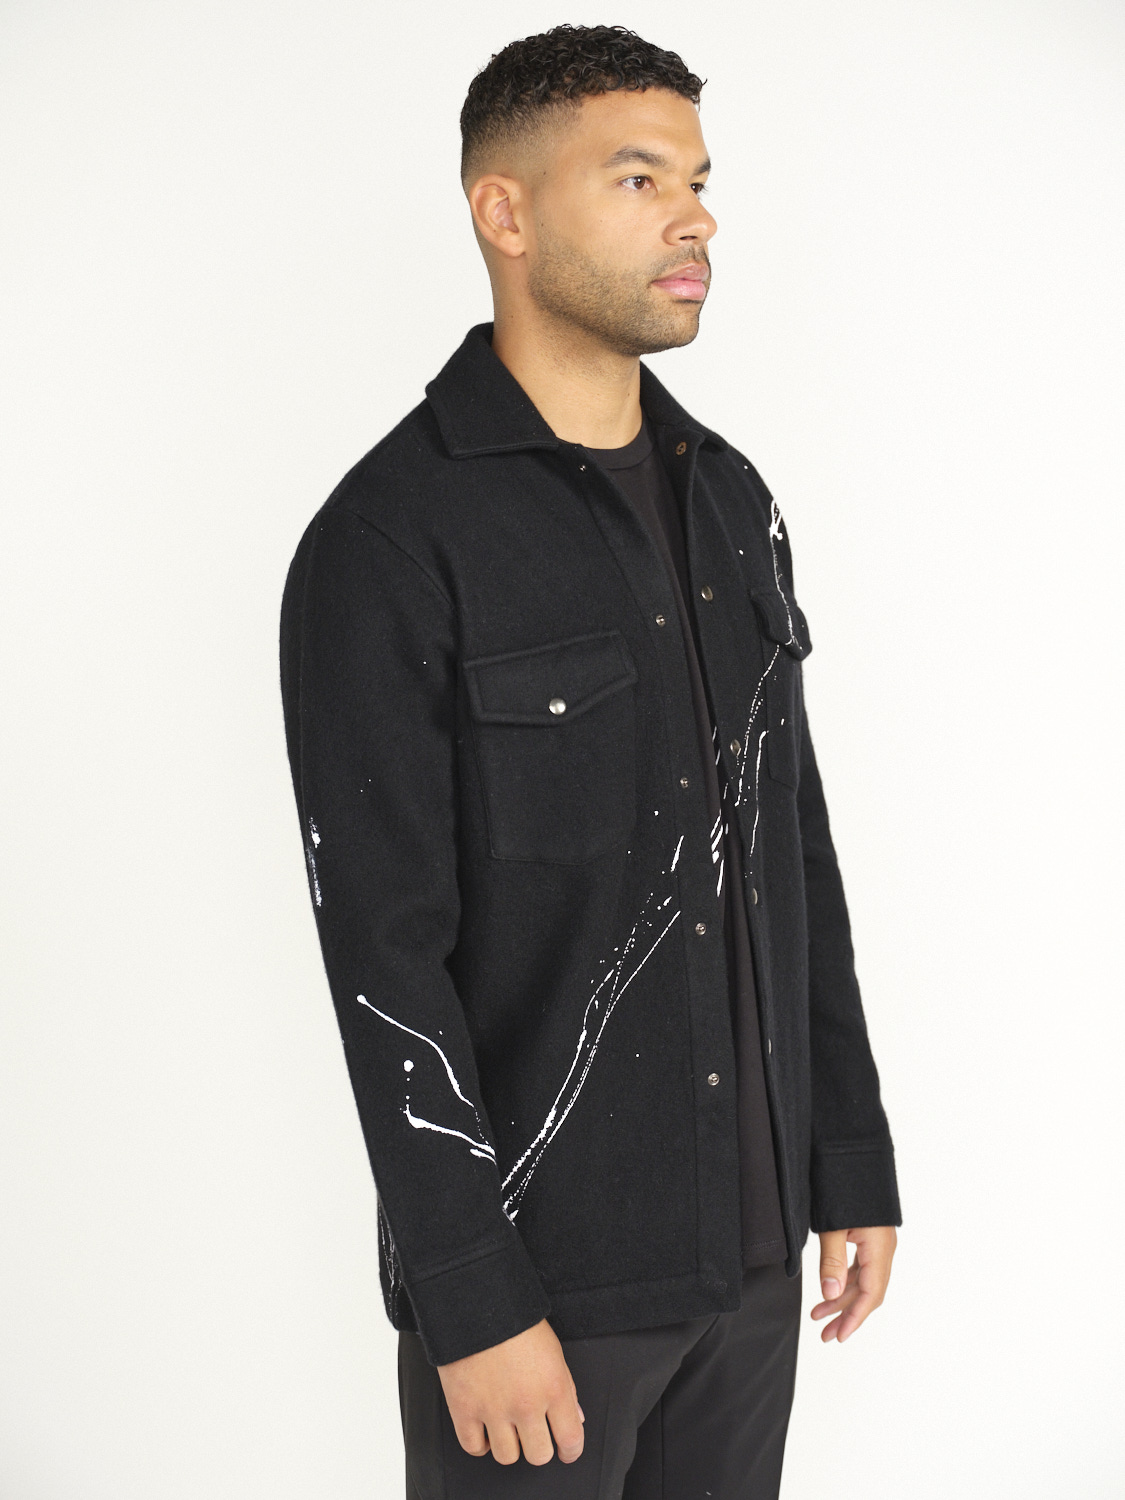 Avant Toi Jacket with pockets and print in merino wool black XL